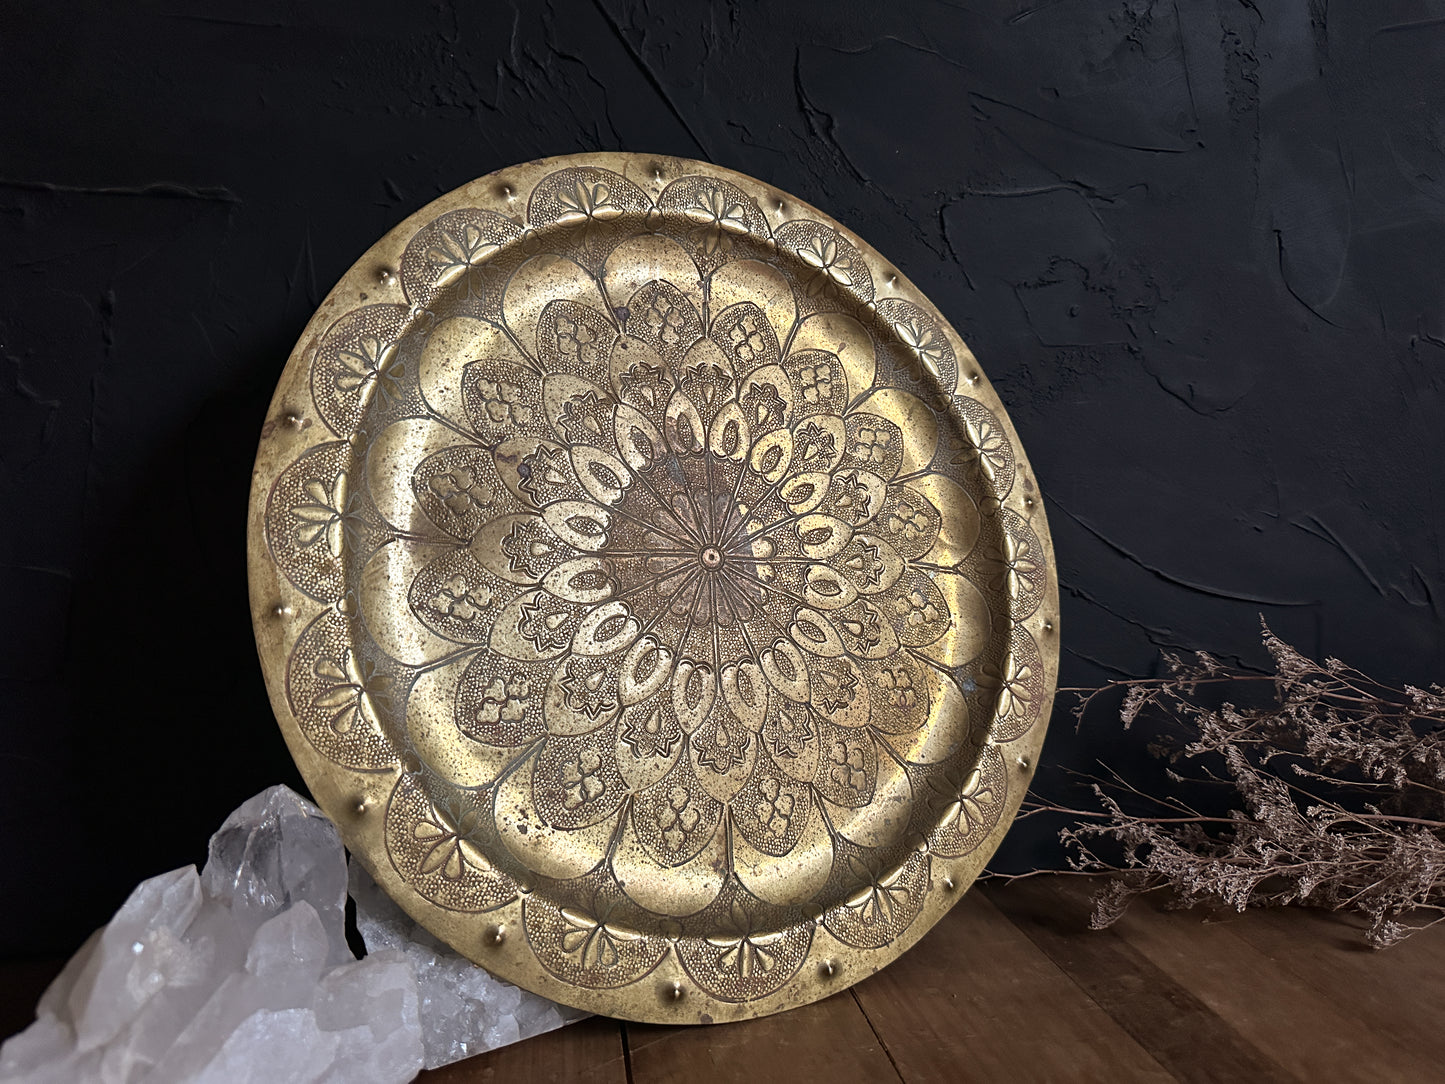 This Gorgeous Large Vintage Brass Dish has the perfect witchy vibe. Would be a perfect place to display jewelry, crystals or herbs. 